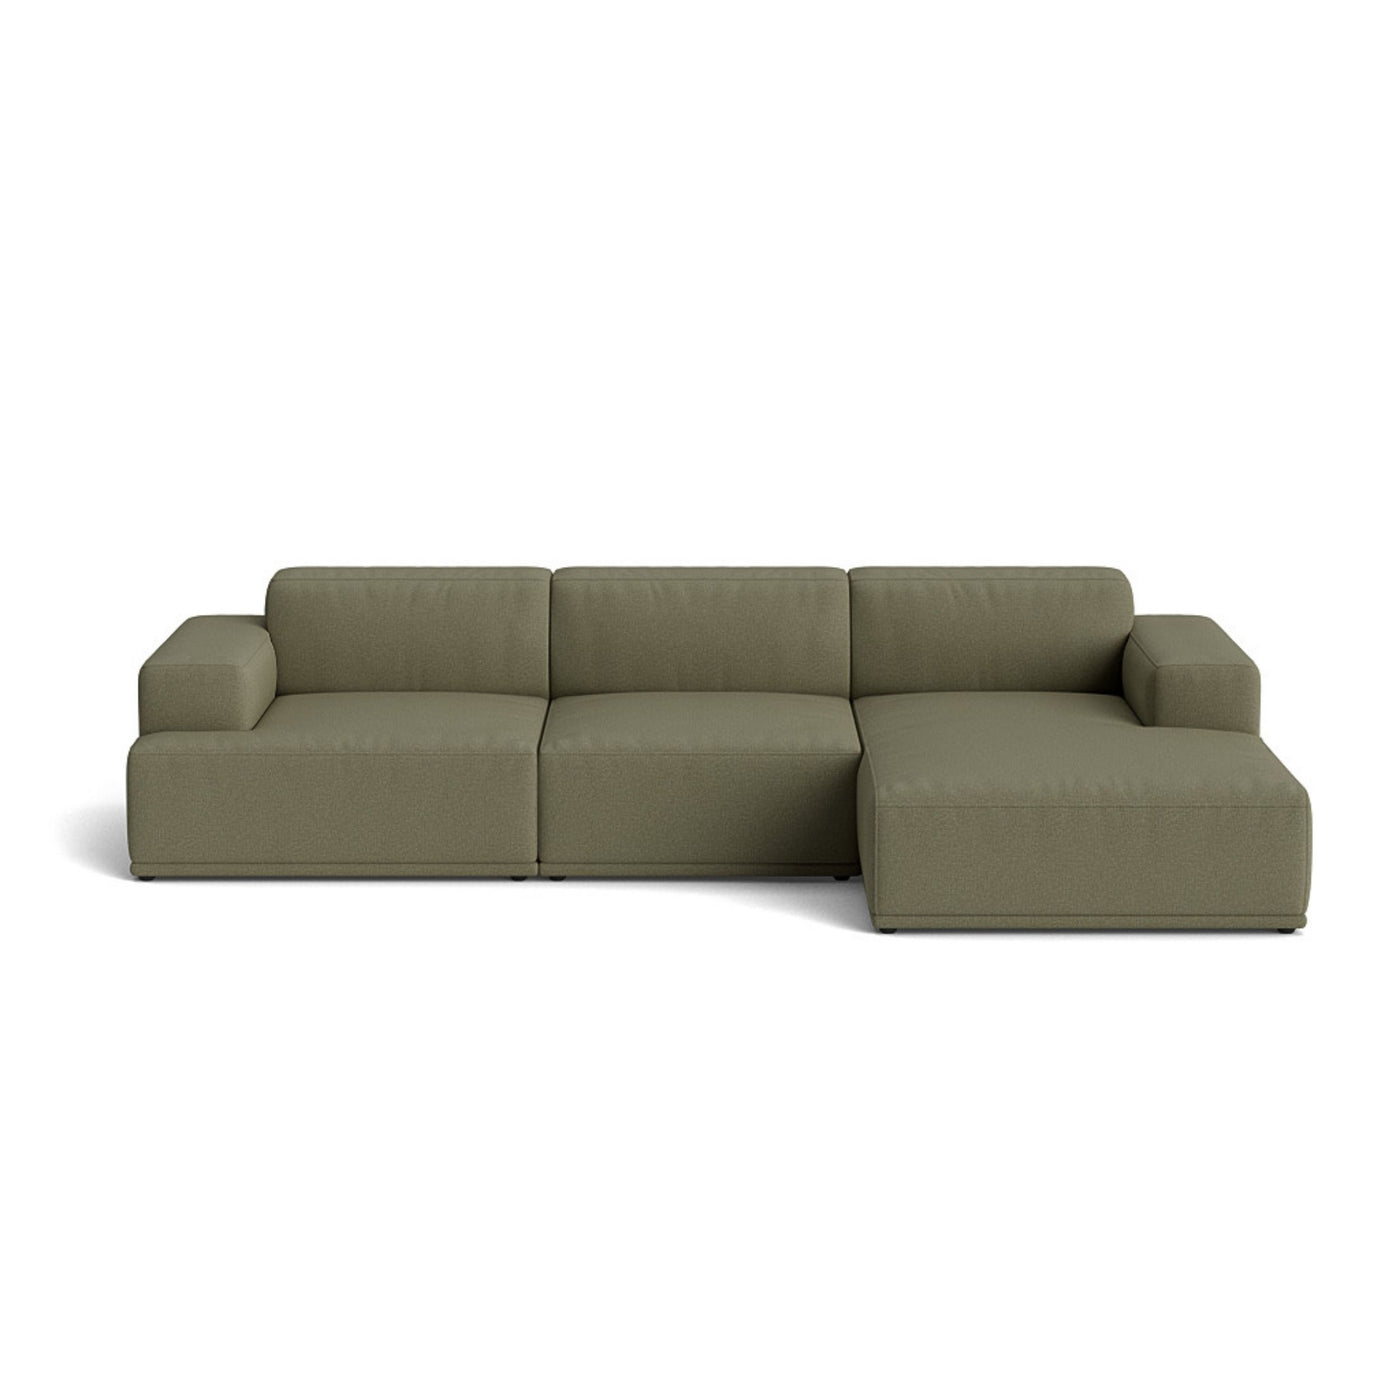 Muuto Connect Soft Modular 3 Seater Sofa, configuration 3. Made-to-order from someday designs. #colour_clay-17